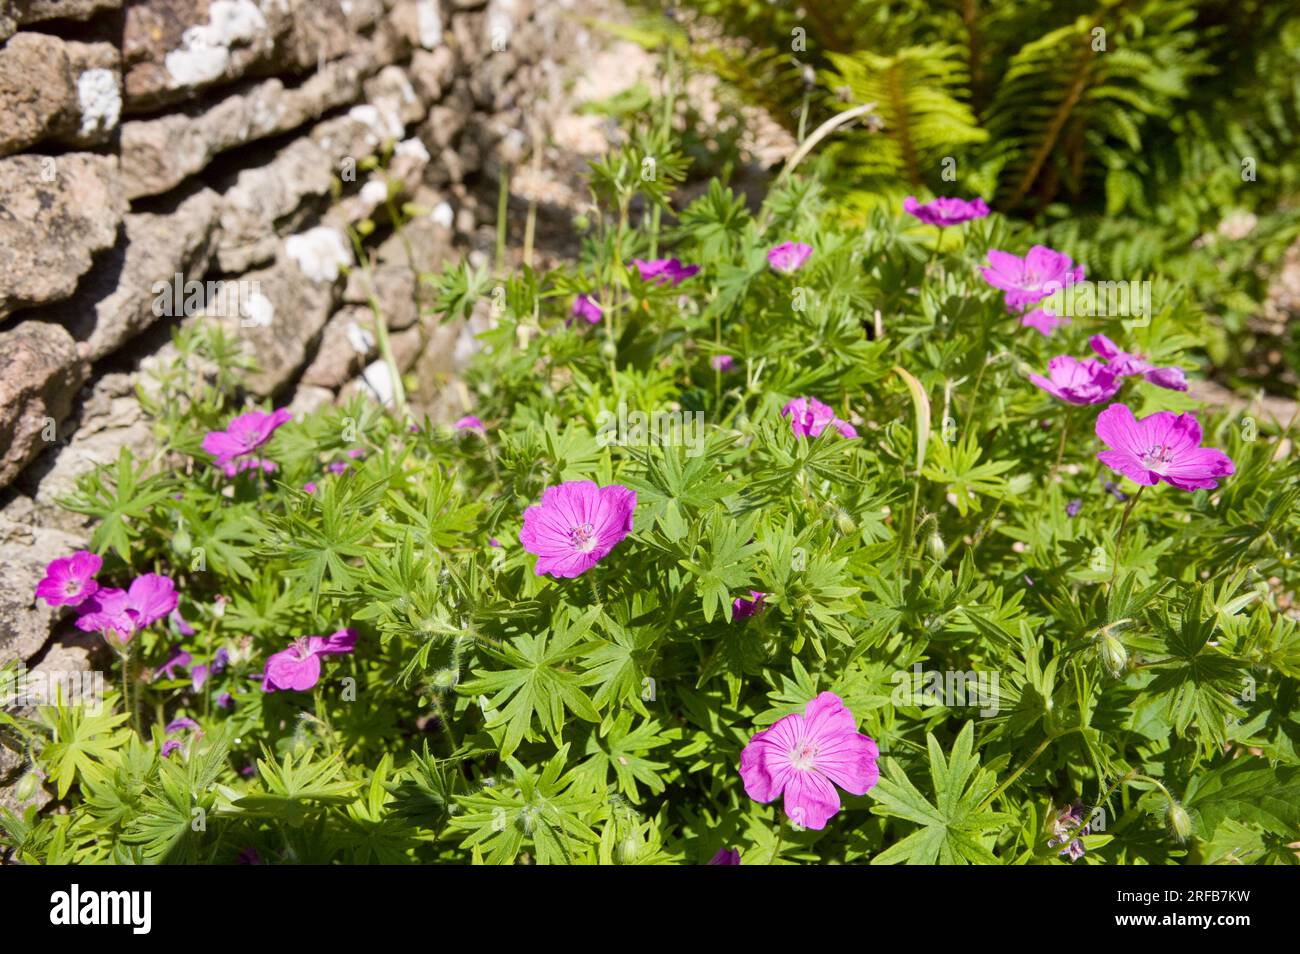 Detail of the flower known as Geranium sanguineum or commonly the bloody carnes bill. Stock Photo